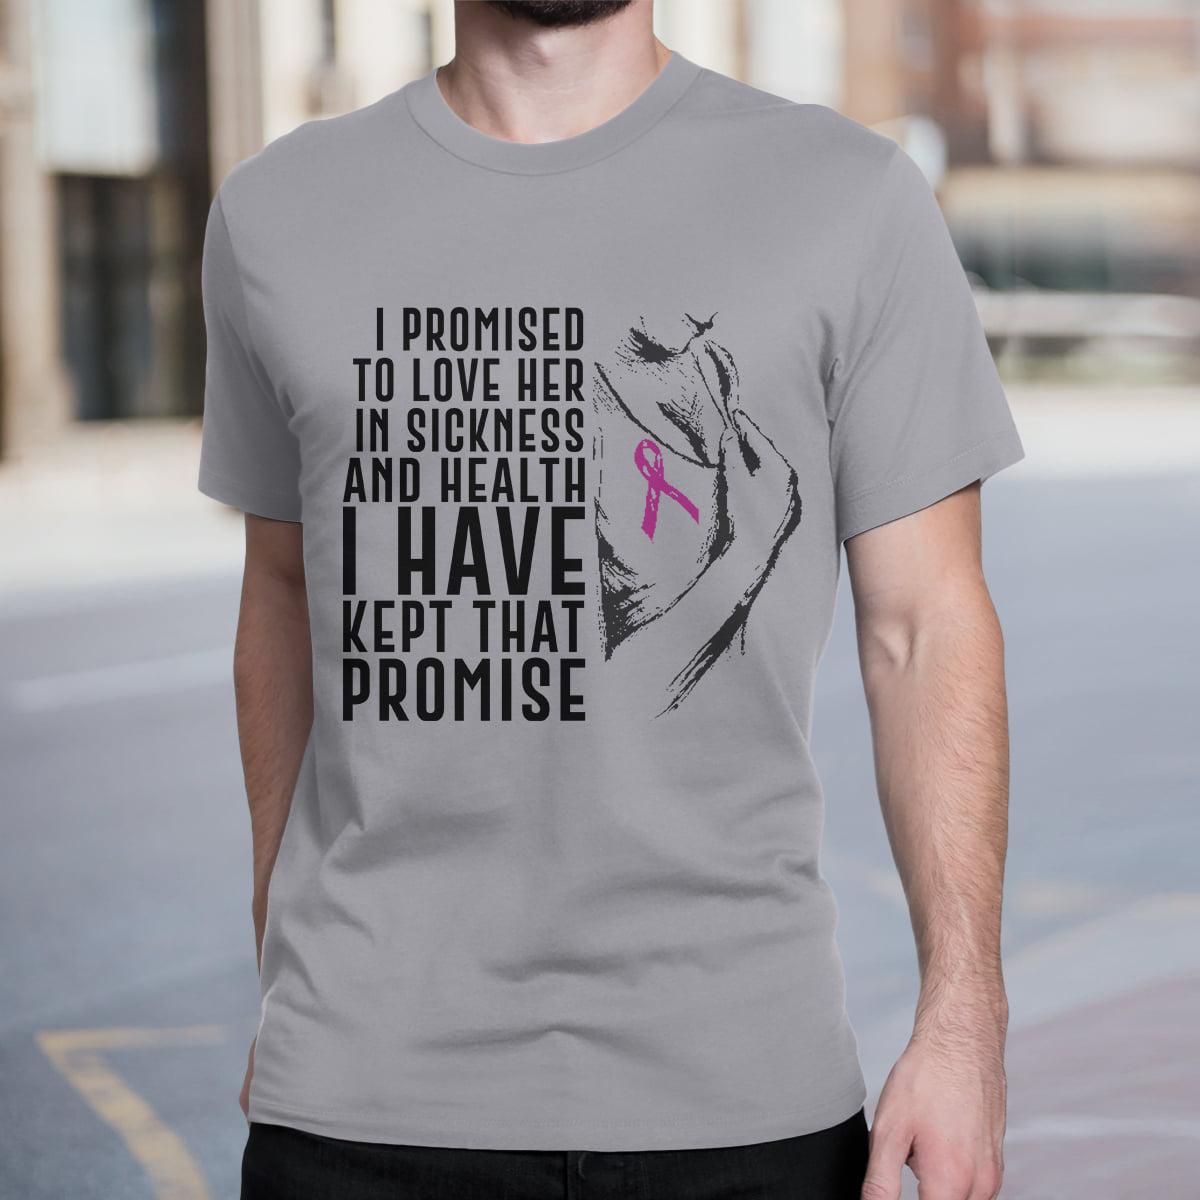 I promised to love her in sickness and health I have kept that promise - Breast cancer awareness, girl with breast cancer